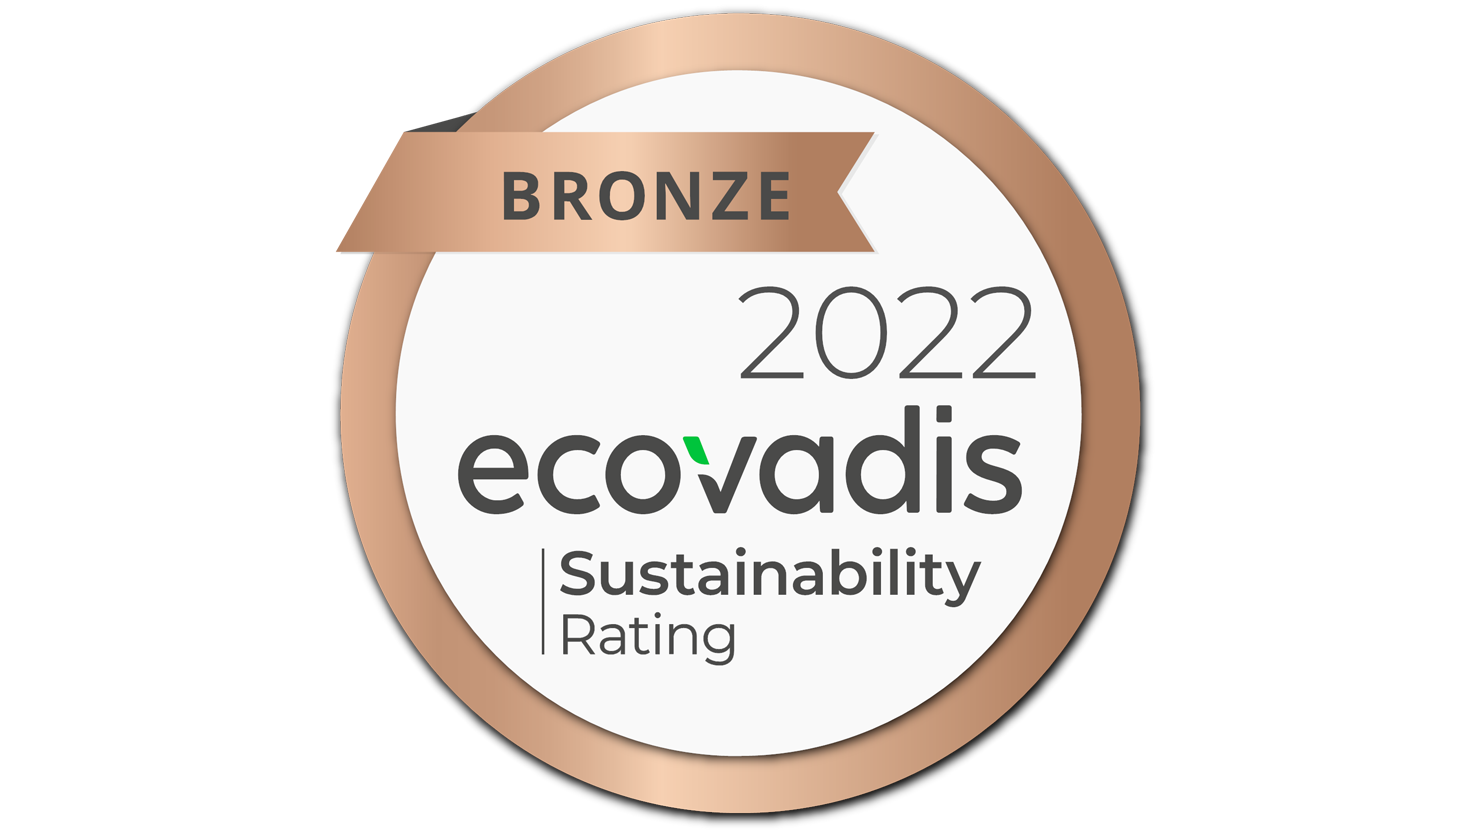 Bronze Medal Ecovadis sustainability rating 2022